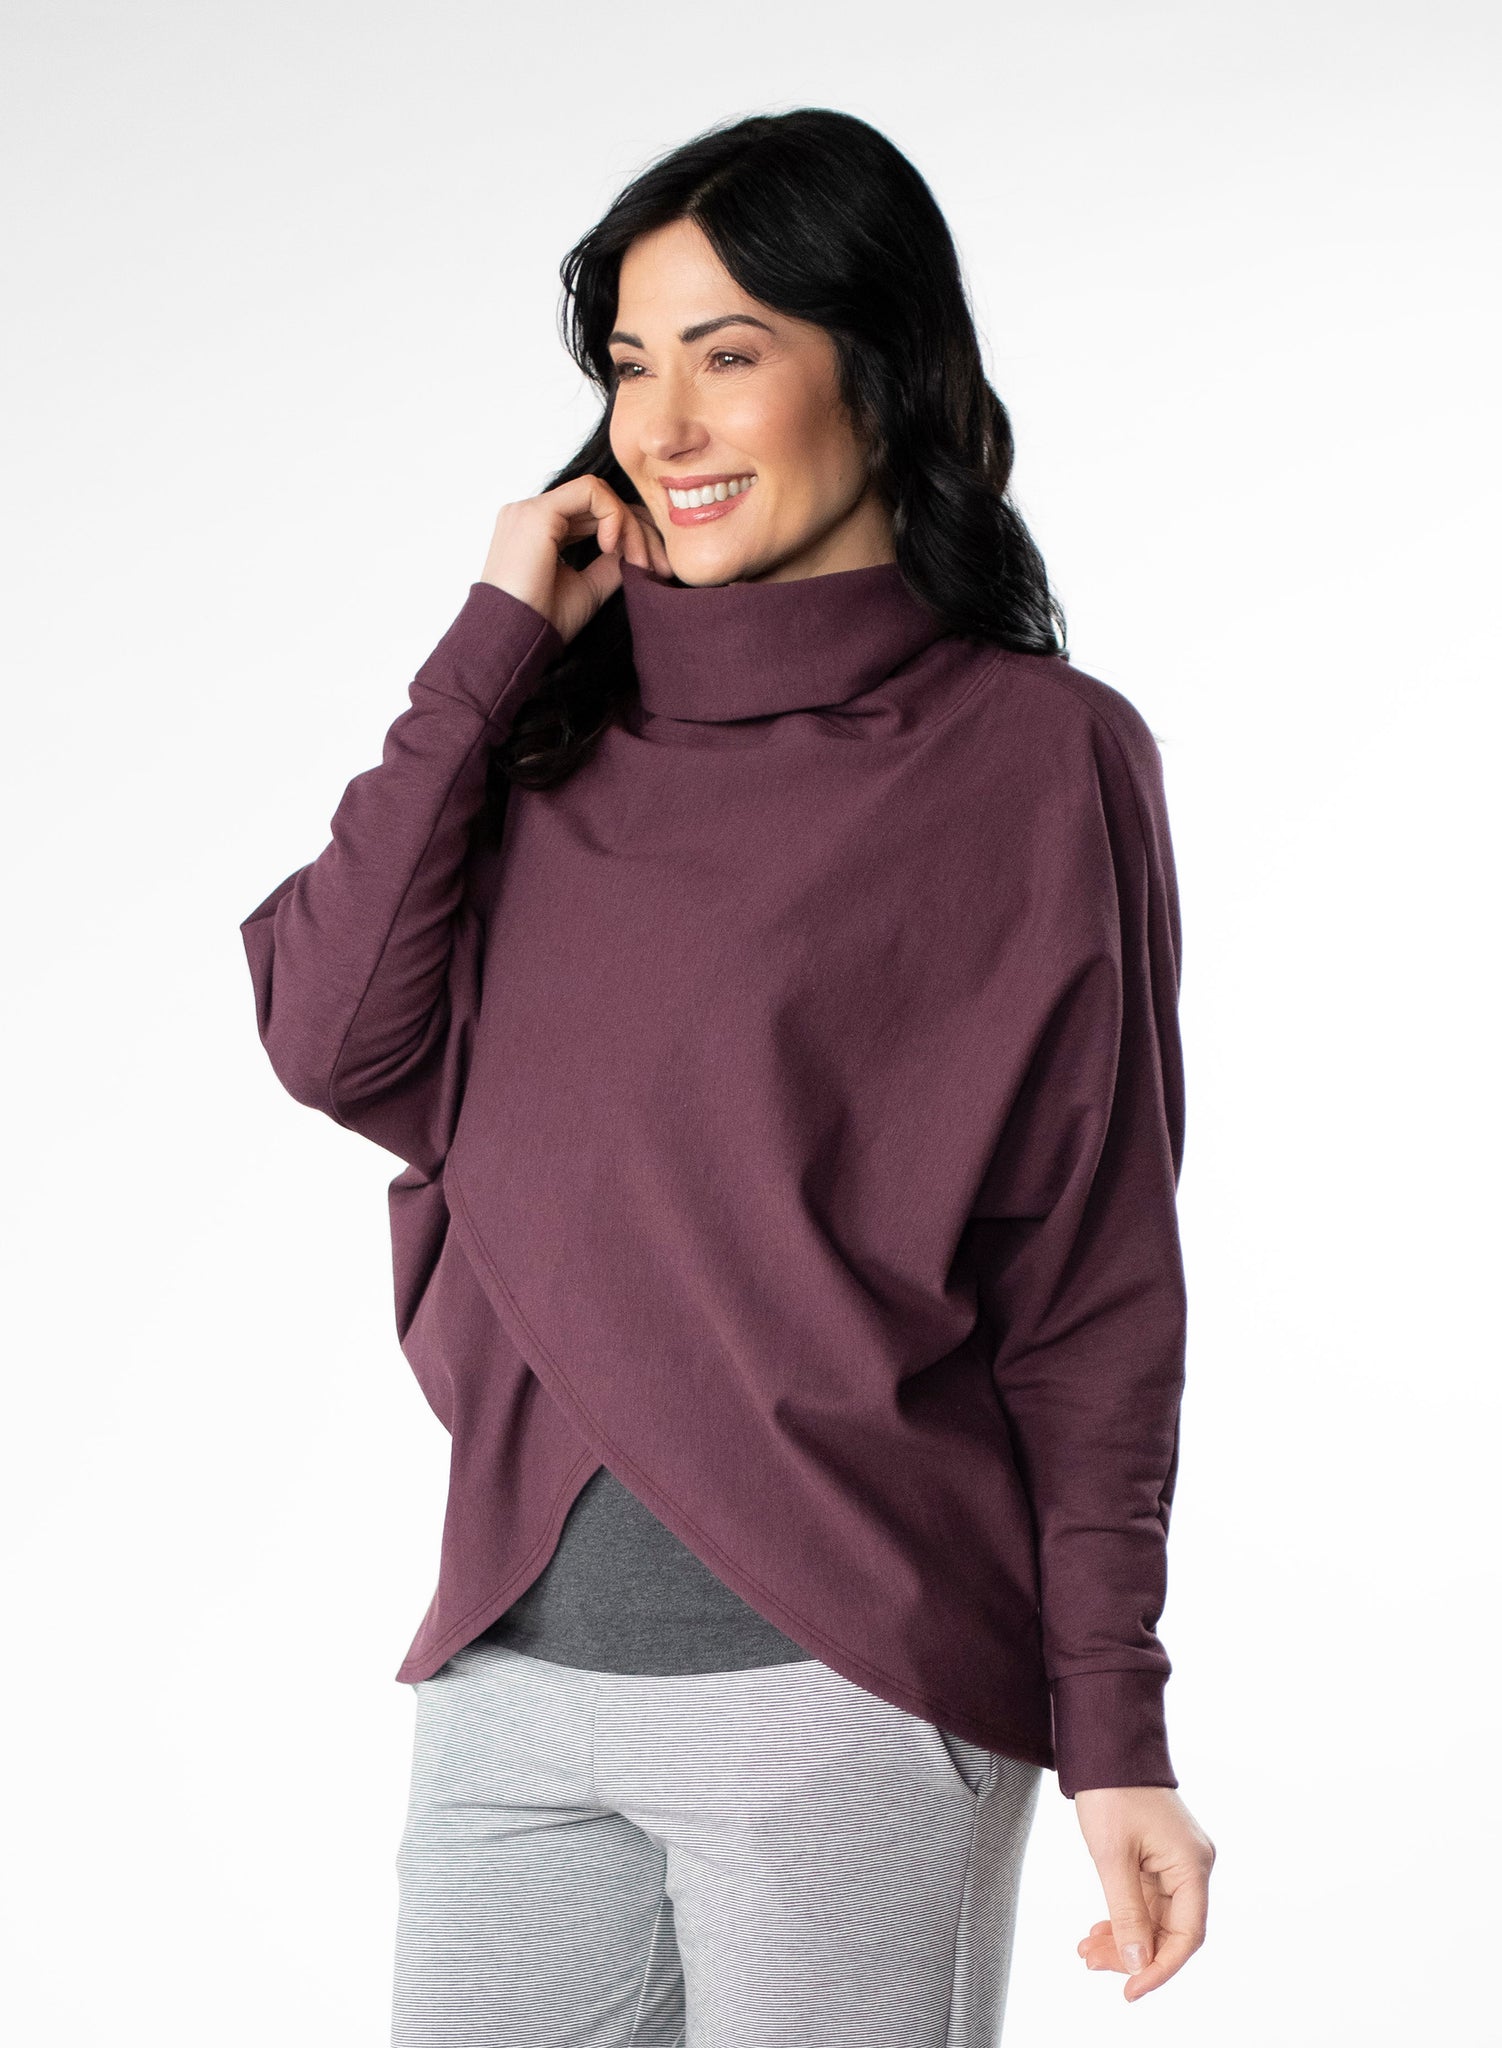 Plum fleece sweater with cowl neck and dolman cuffed sleeves. Sweater features a reverse-V drape in front.